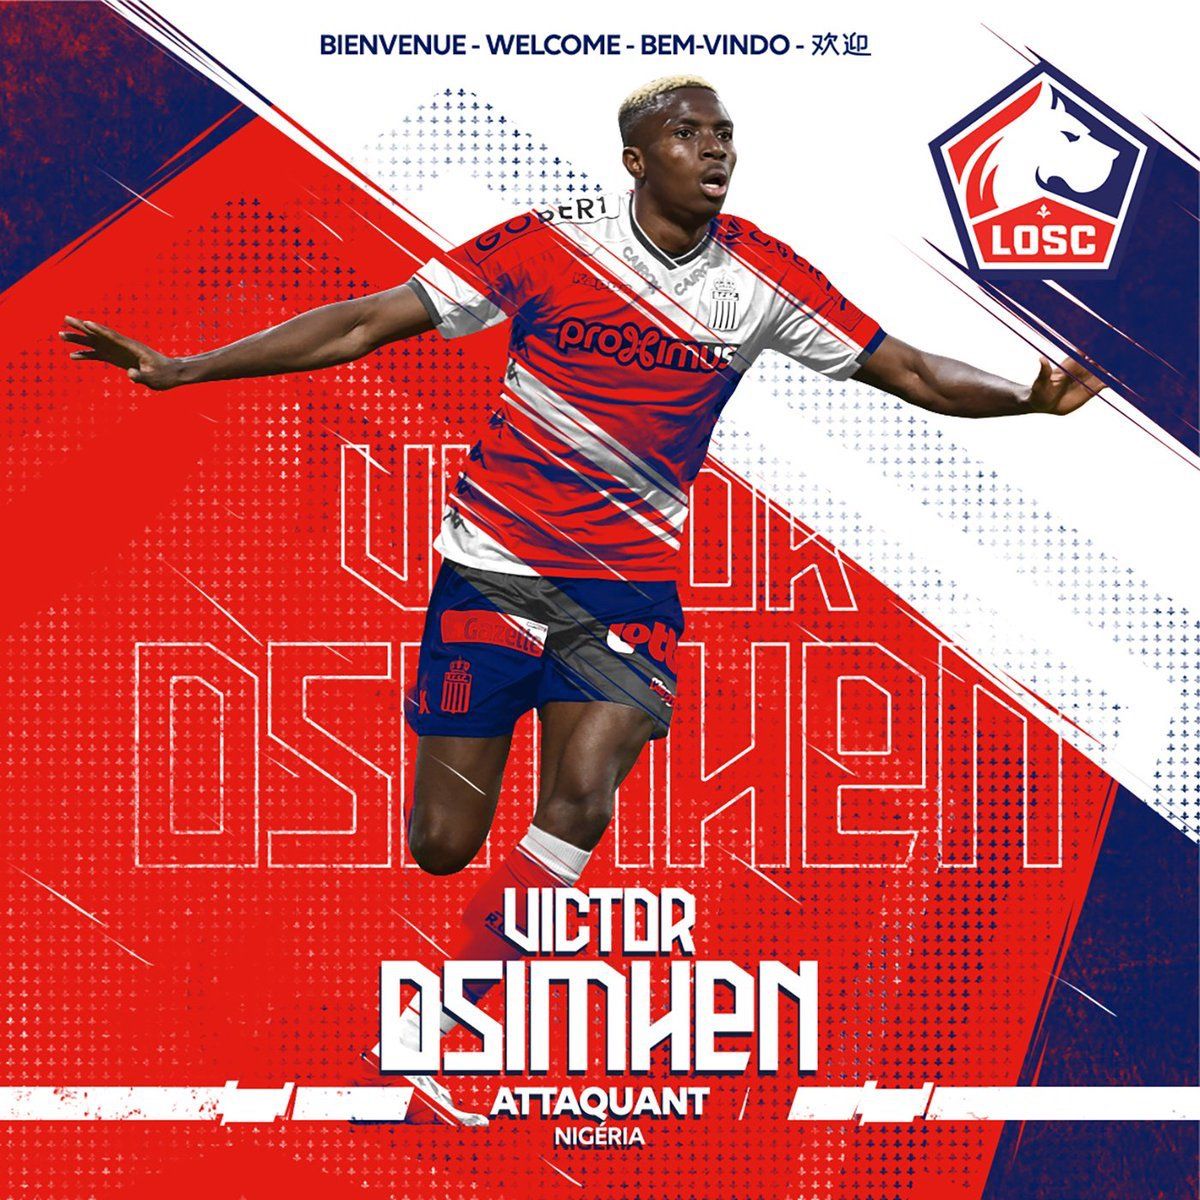 LOSC Lille EN big #LOSC welcome to our newest